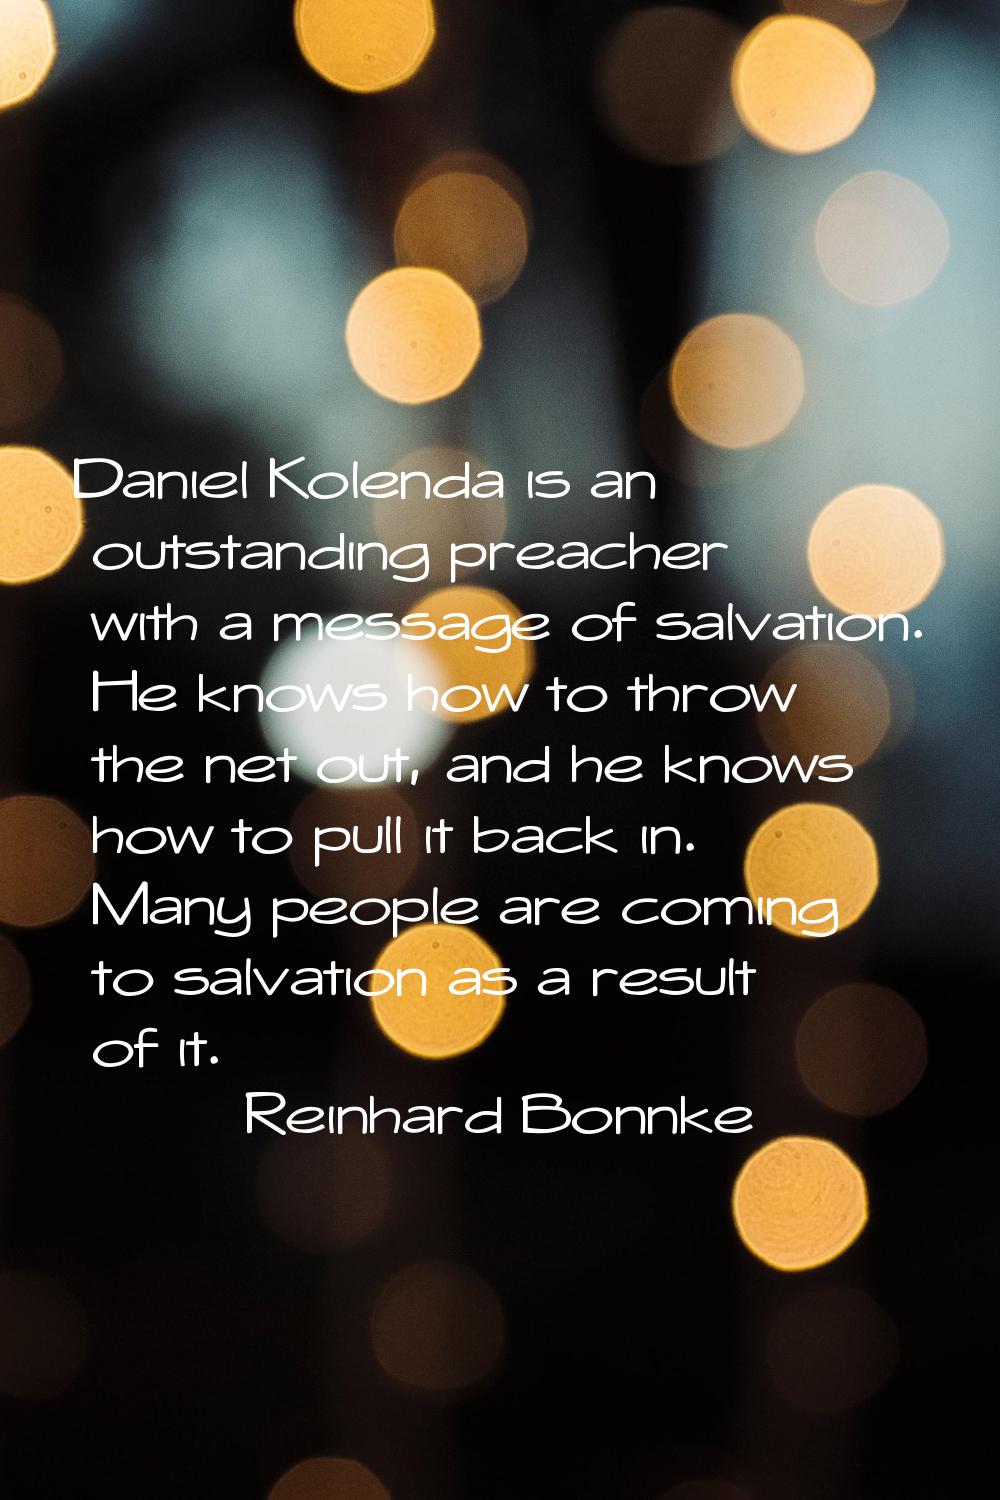 Daniel Kolenda is an outstanding preacher with a message of salvation. He knows how to throw the ne